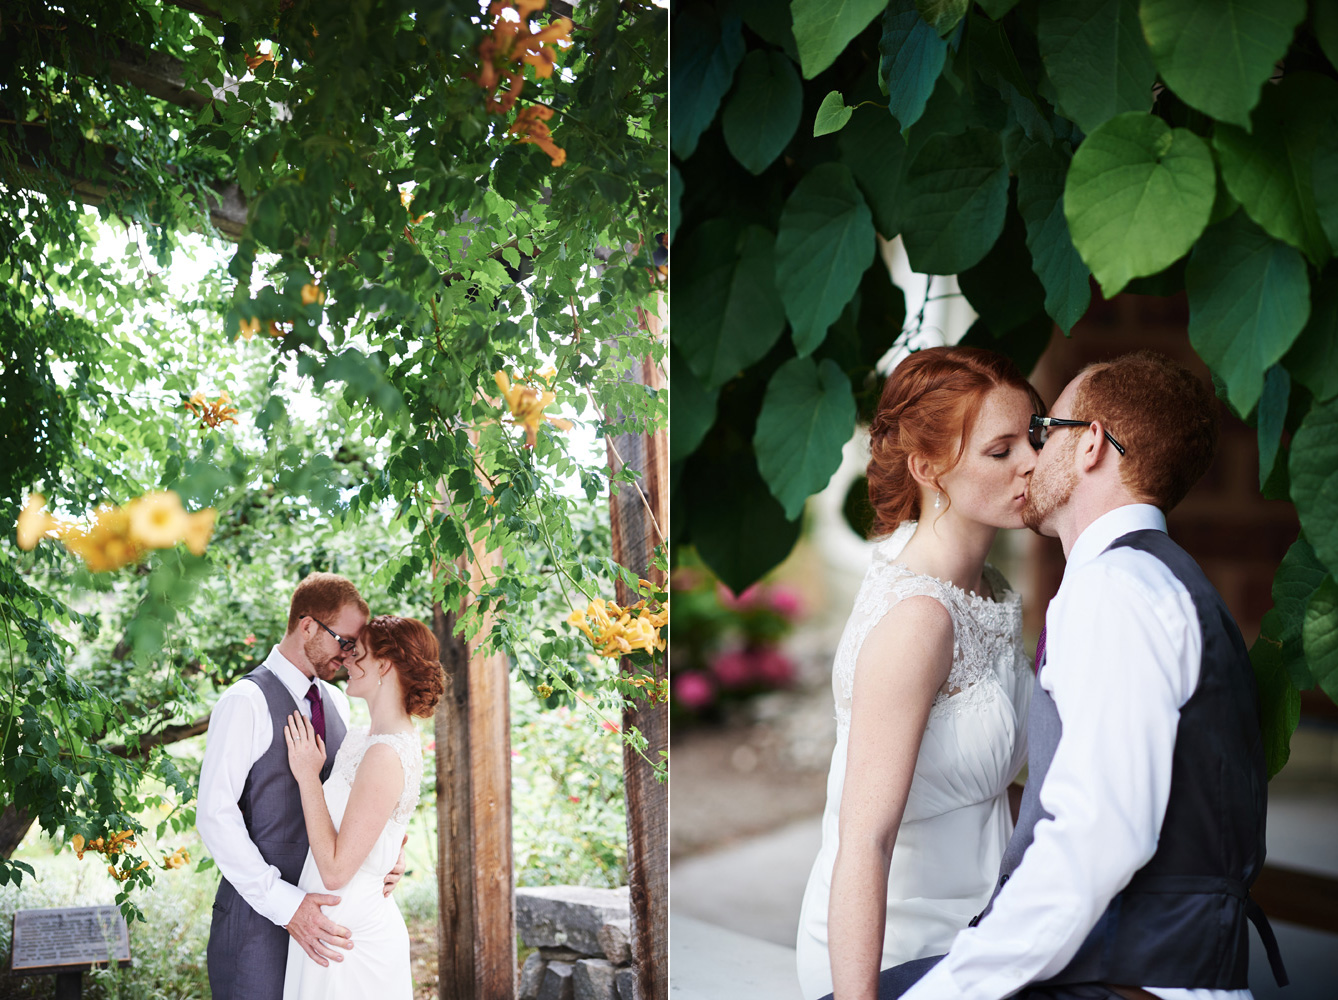 bride-and-groom-in-love-under-a-arch-of-flowers.jpg